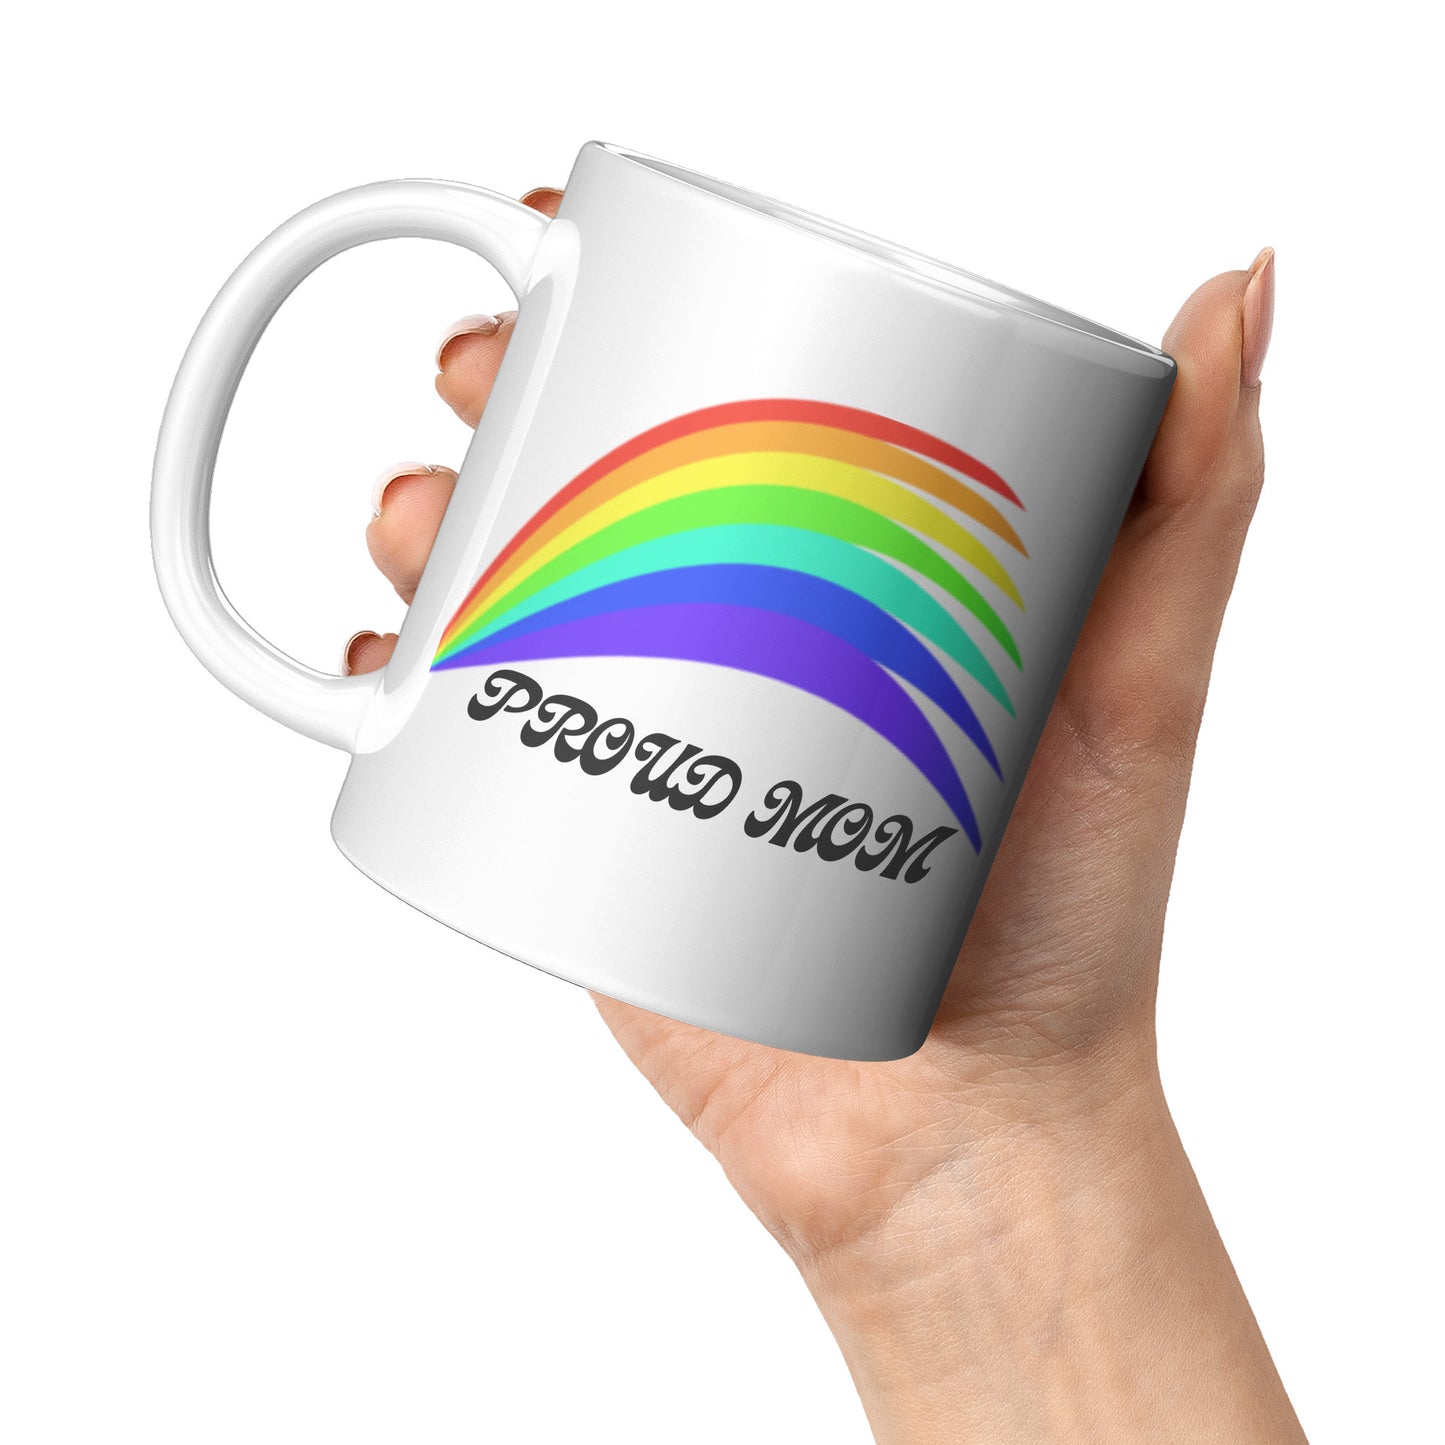 LGBTQ+ Pride Rainbow Mug For Mom To Support Your Loved Ones, White With Colourful Design